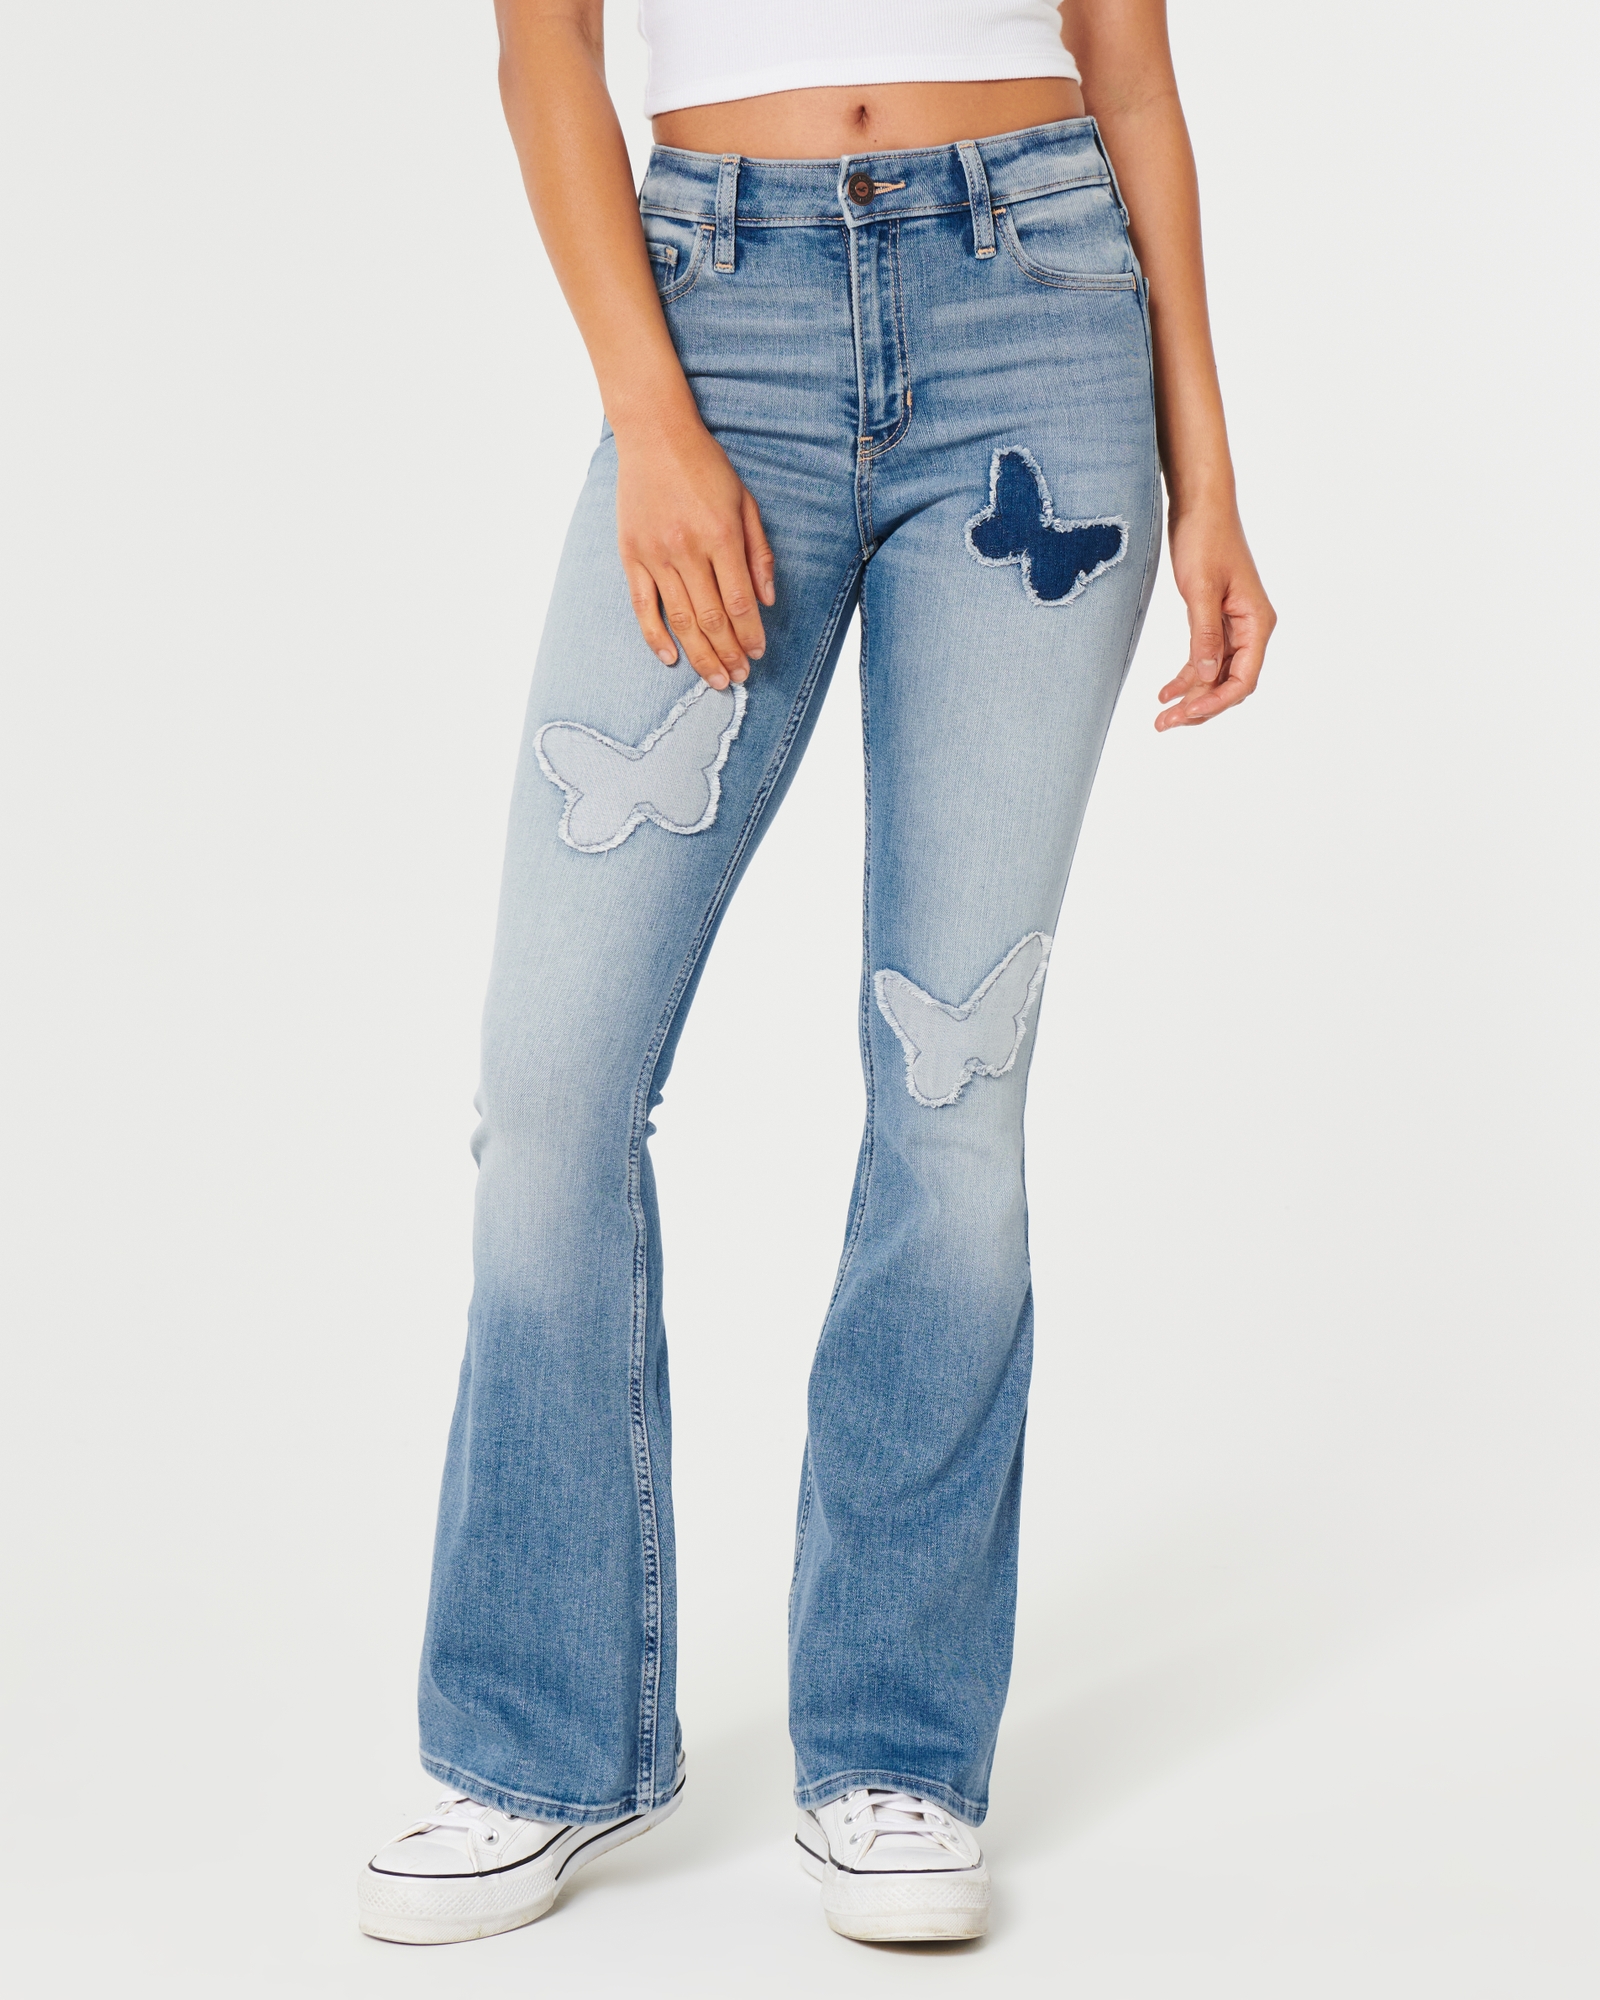 https://img.hollisterco.com/is/image/anf/KIC_355-3399-0011-278_model2.jpg?policy=product-extra-large